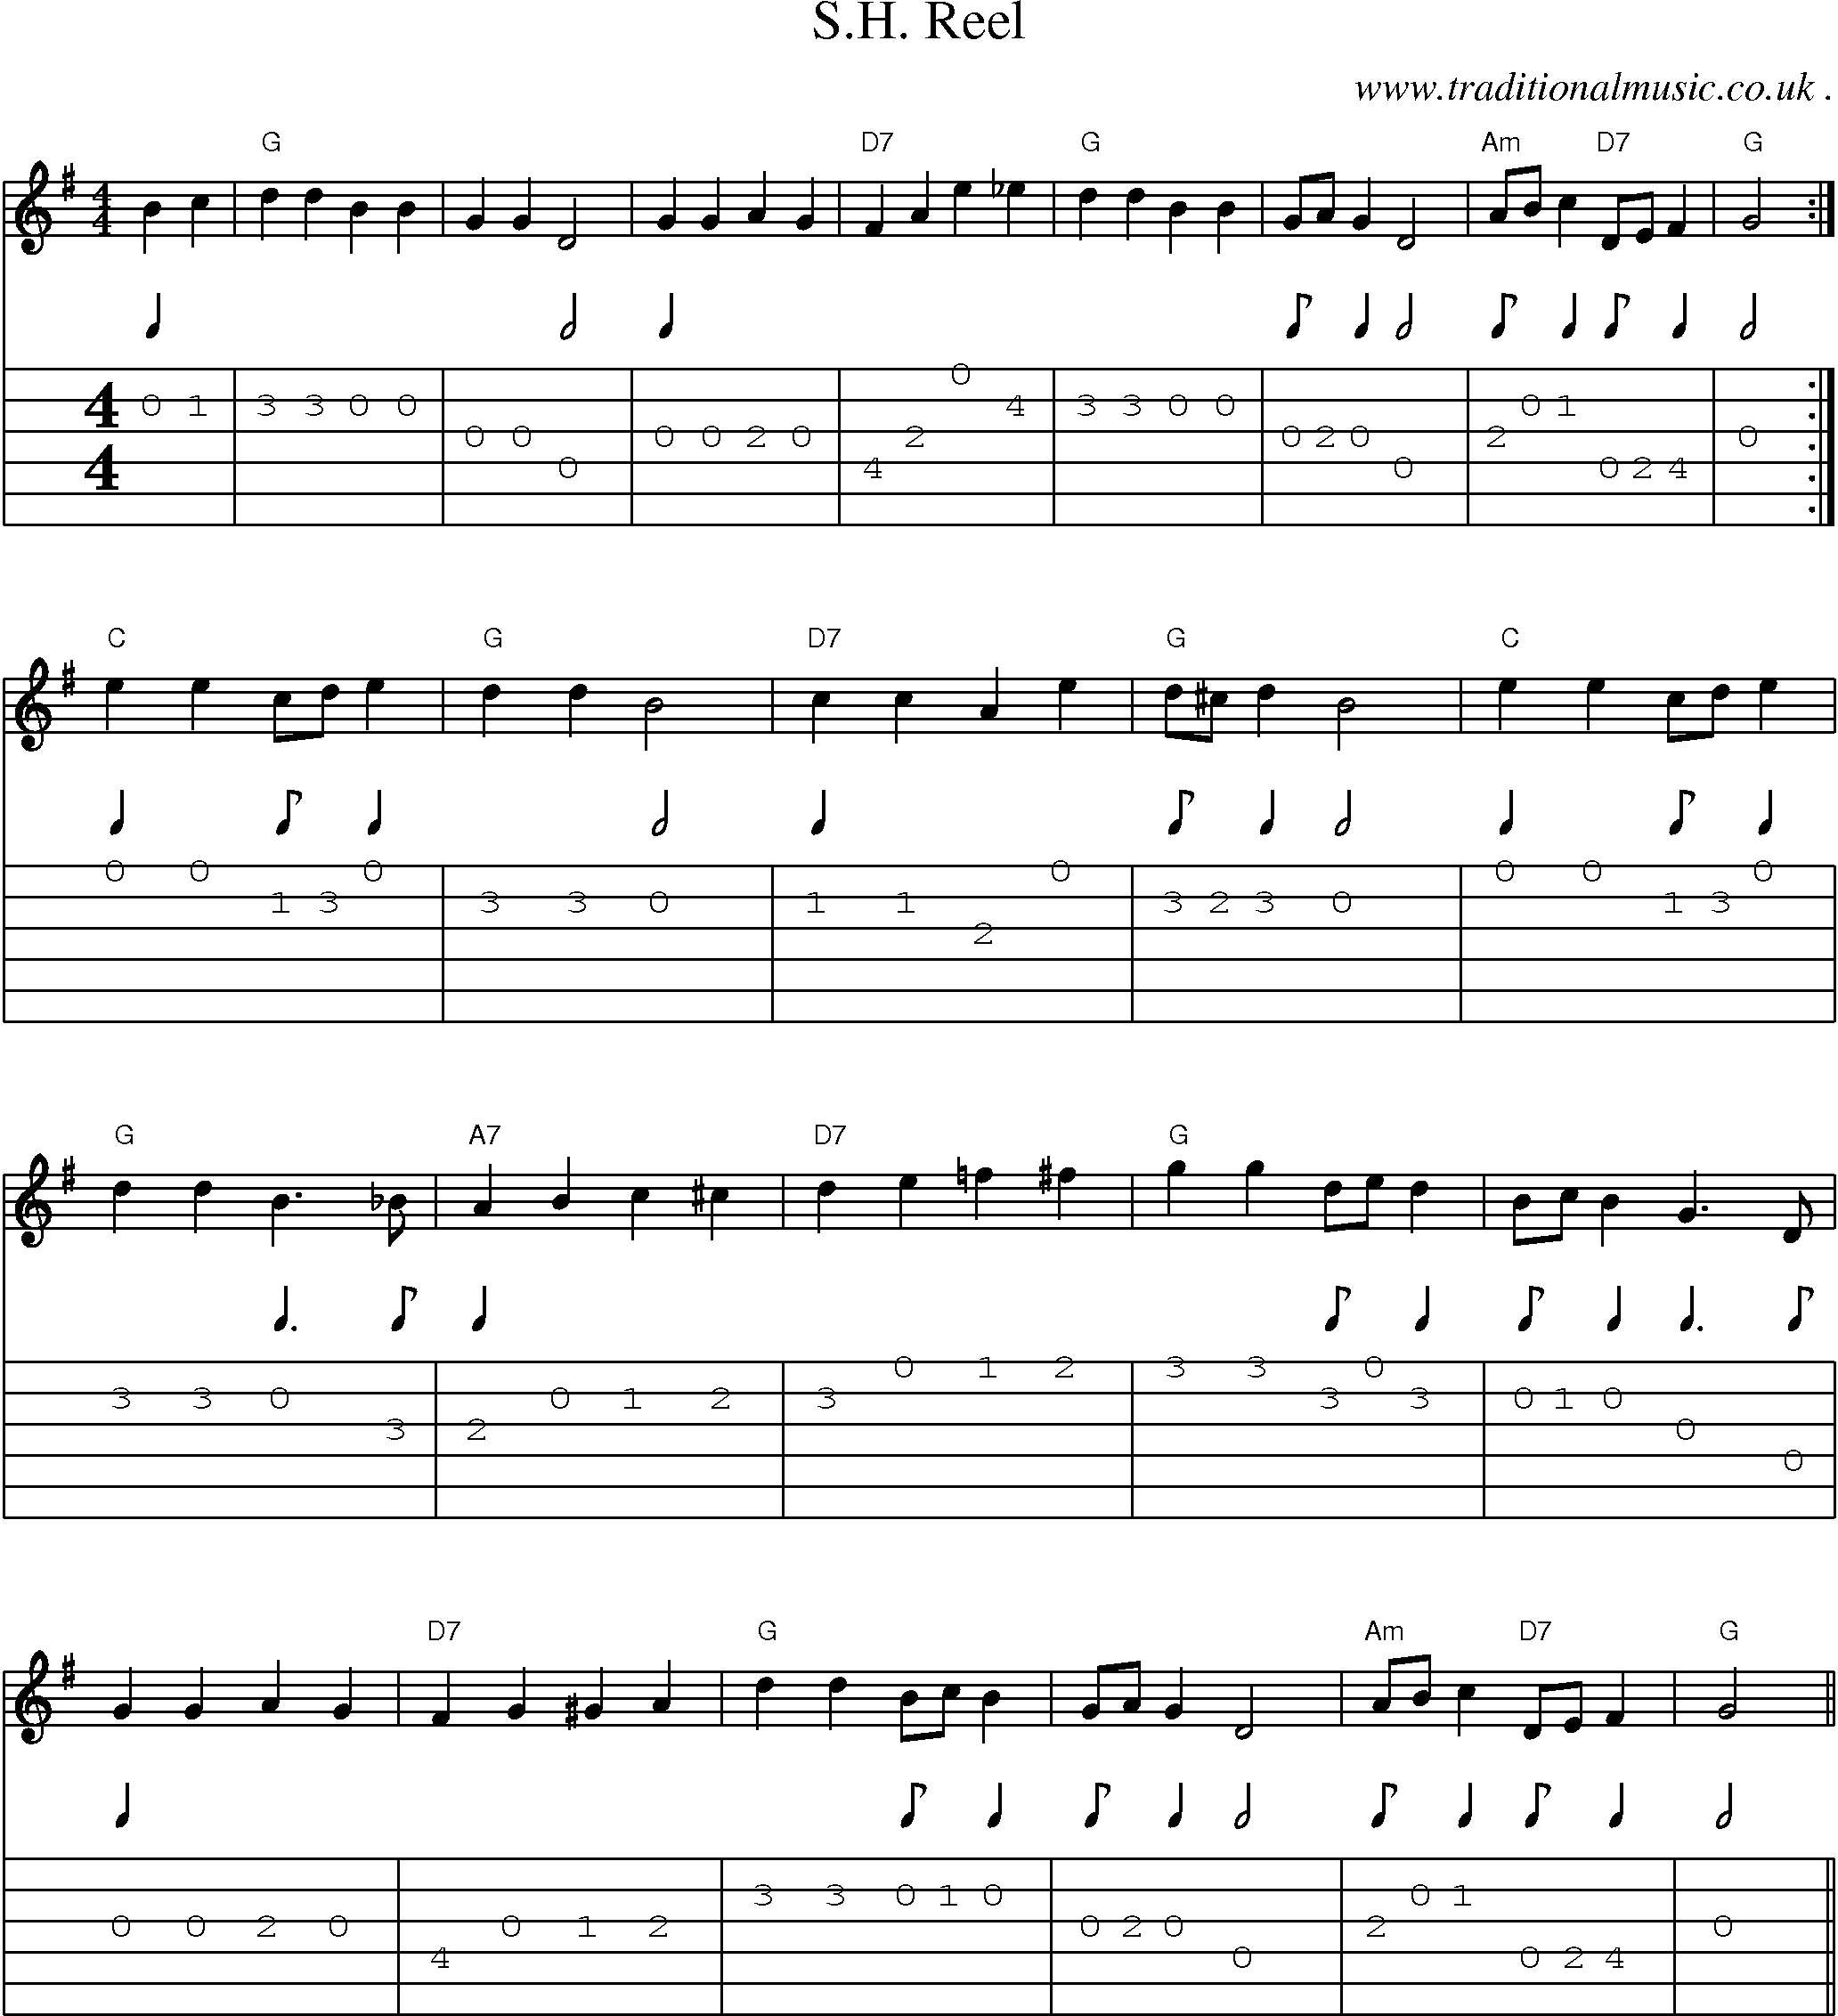 Sheet-Music and Guitar Tabs for Sh Reel